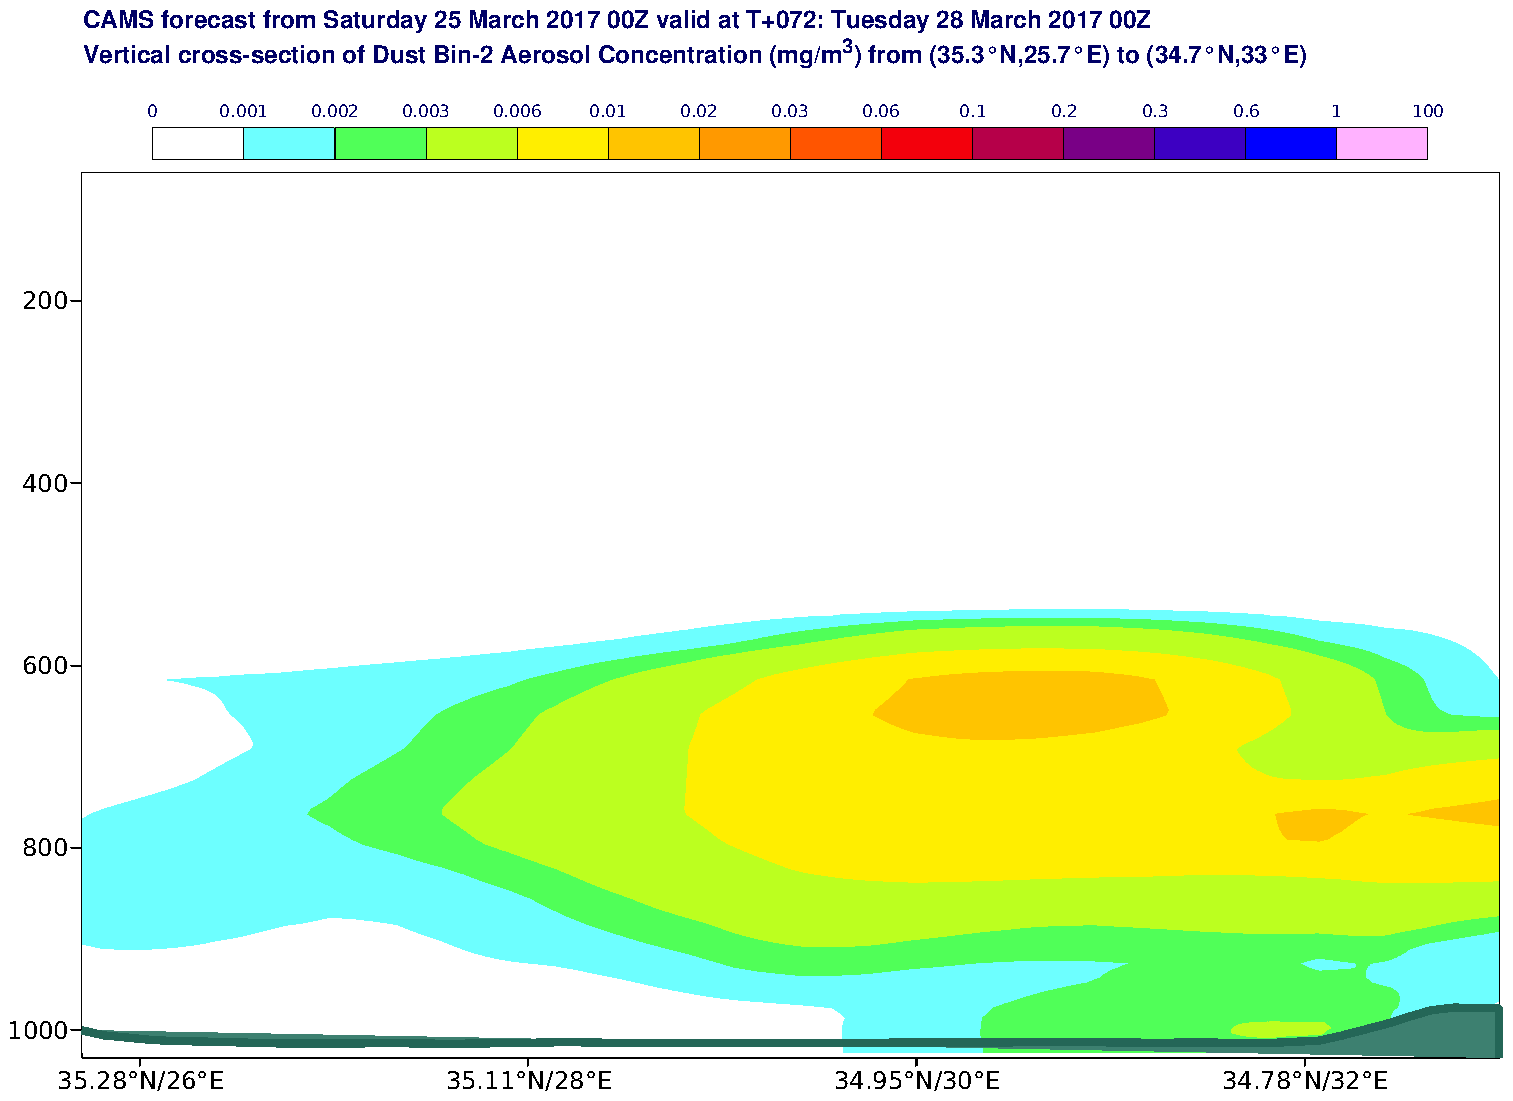 Vertical cross-section of Dust Bin-2 Aerosol Concentration (mg/m3) valid at T72 - 2017-03-28 00:00